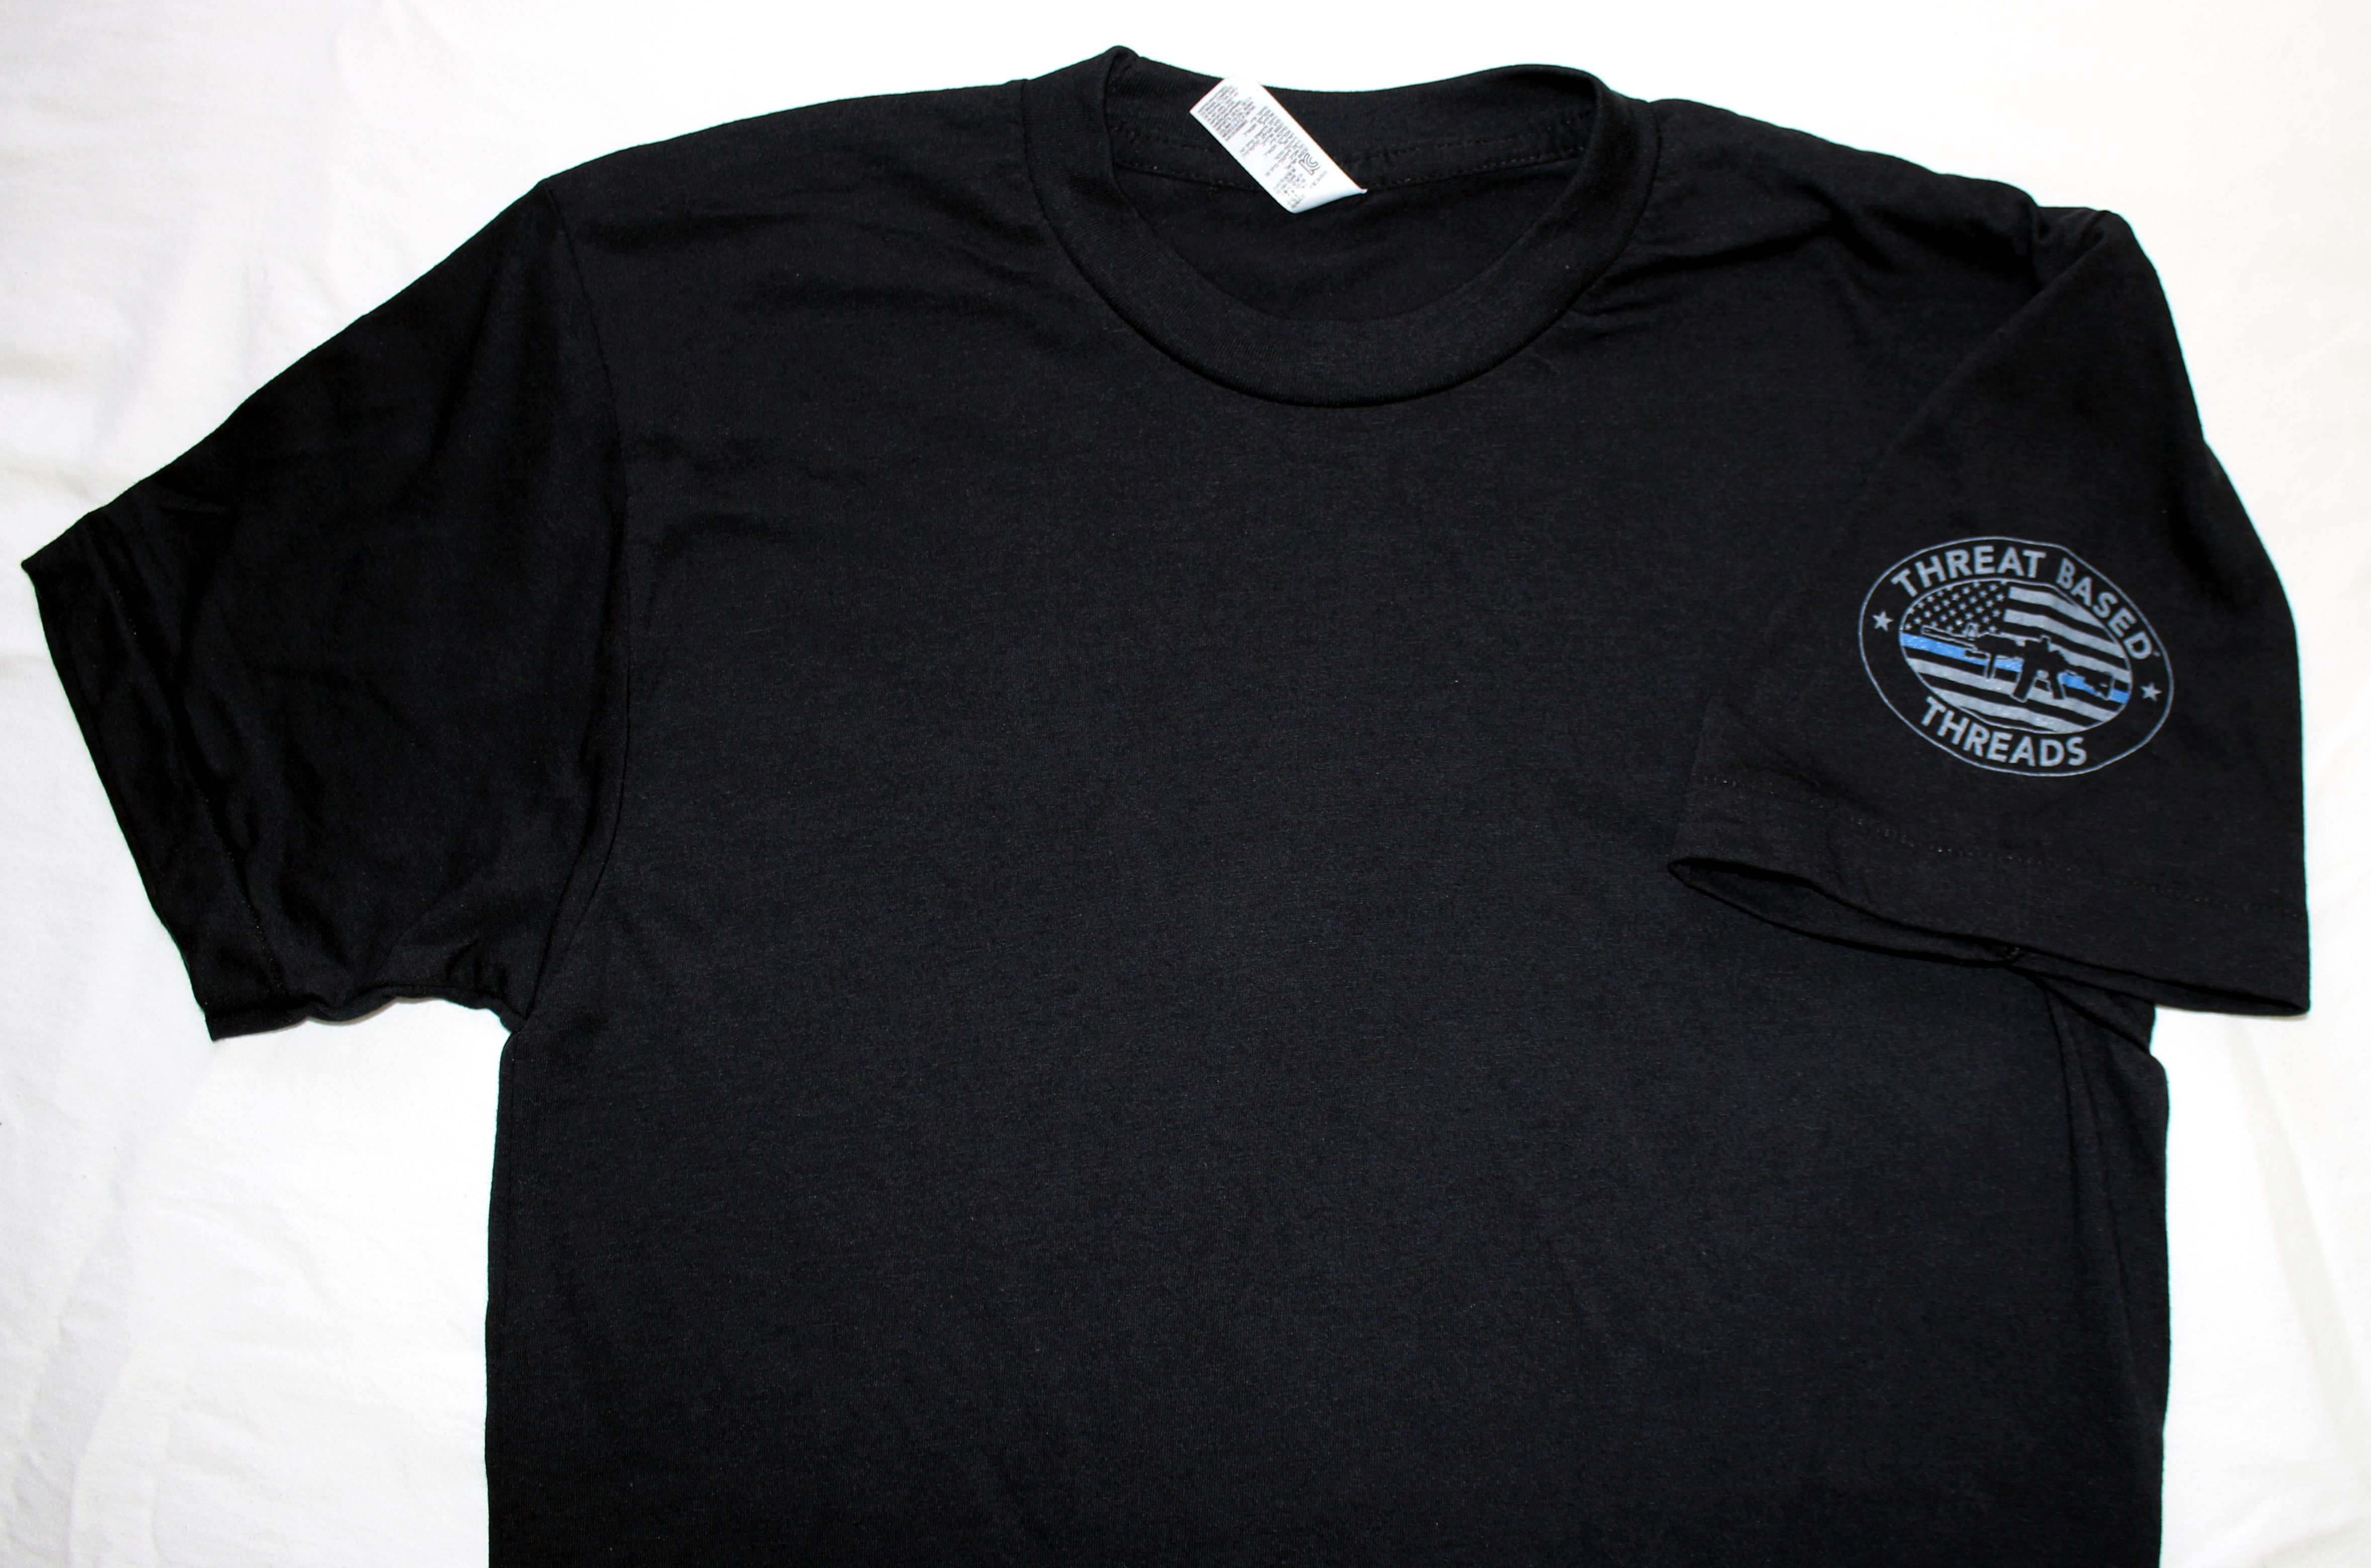 Blue Bloods Shirts In Stock Now!! – Giving Back